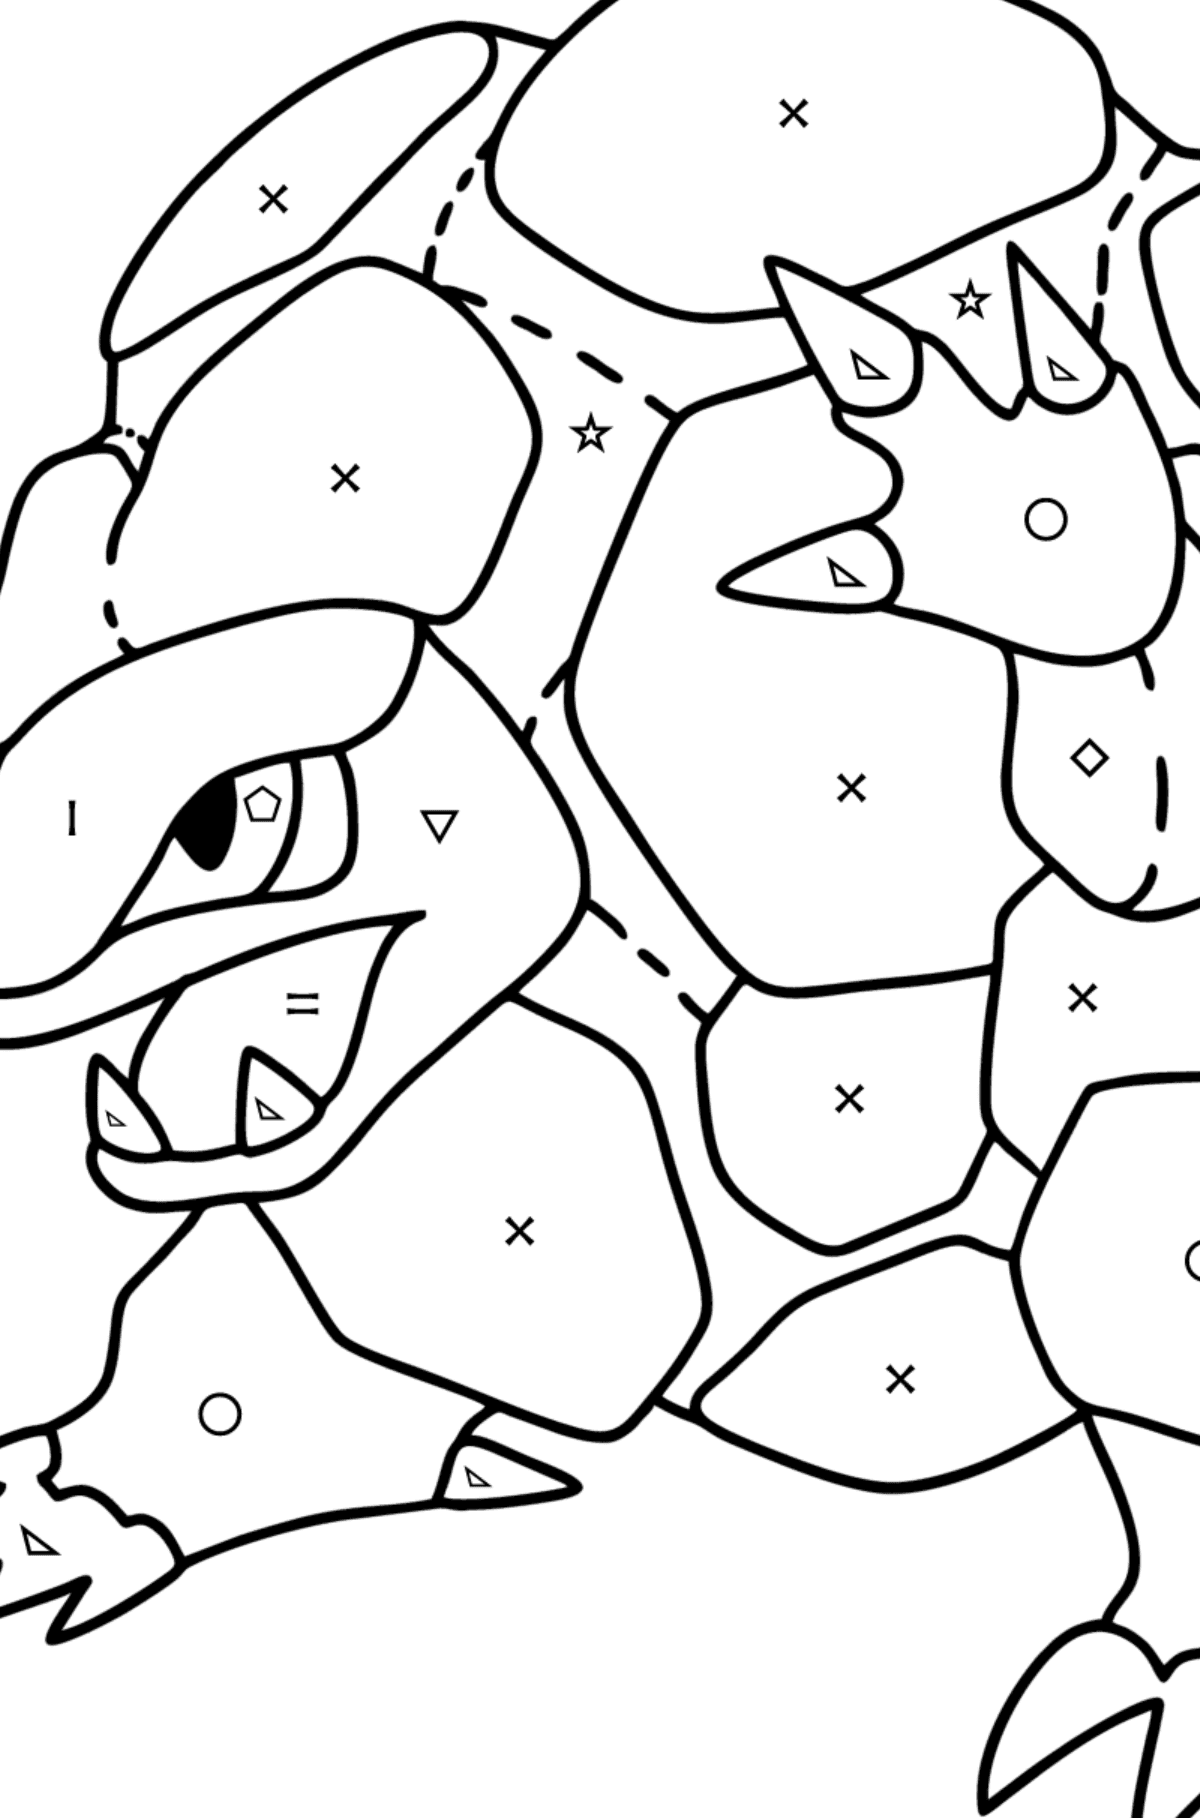 Pokemon Go Golem coloring page - Coloring by Symbols and Geometric Shapes for Kids